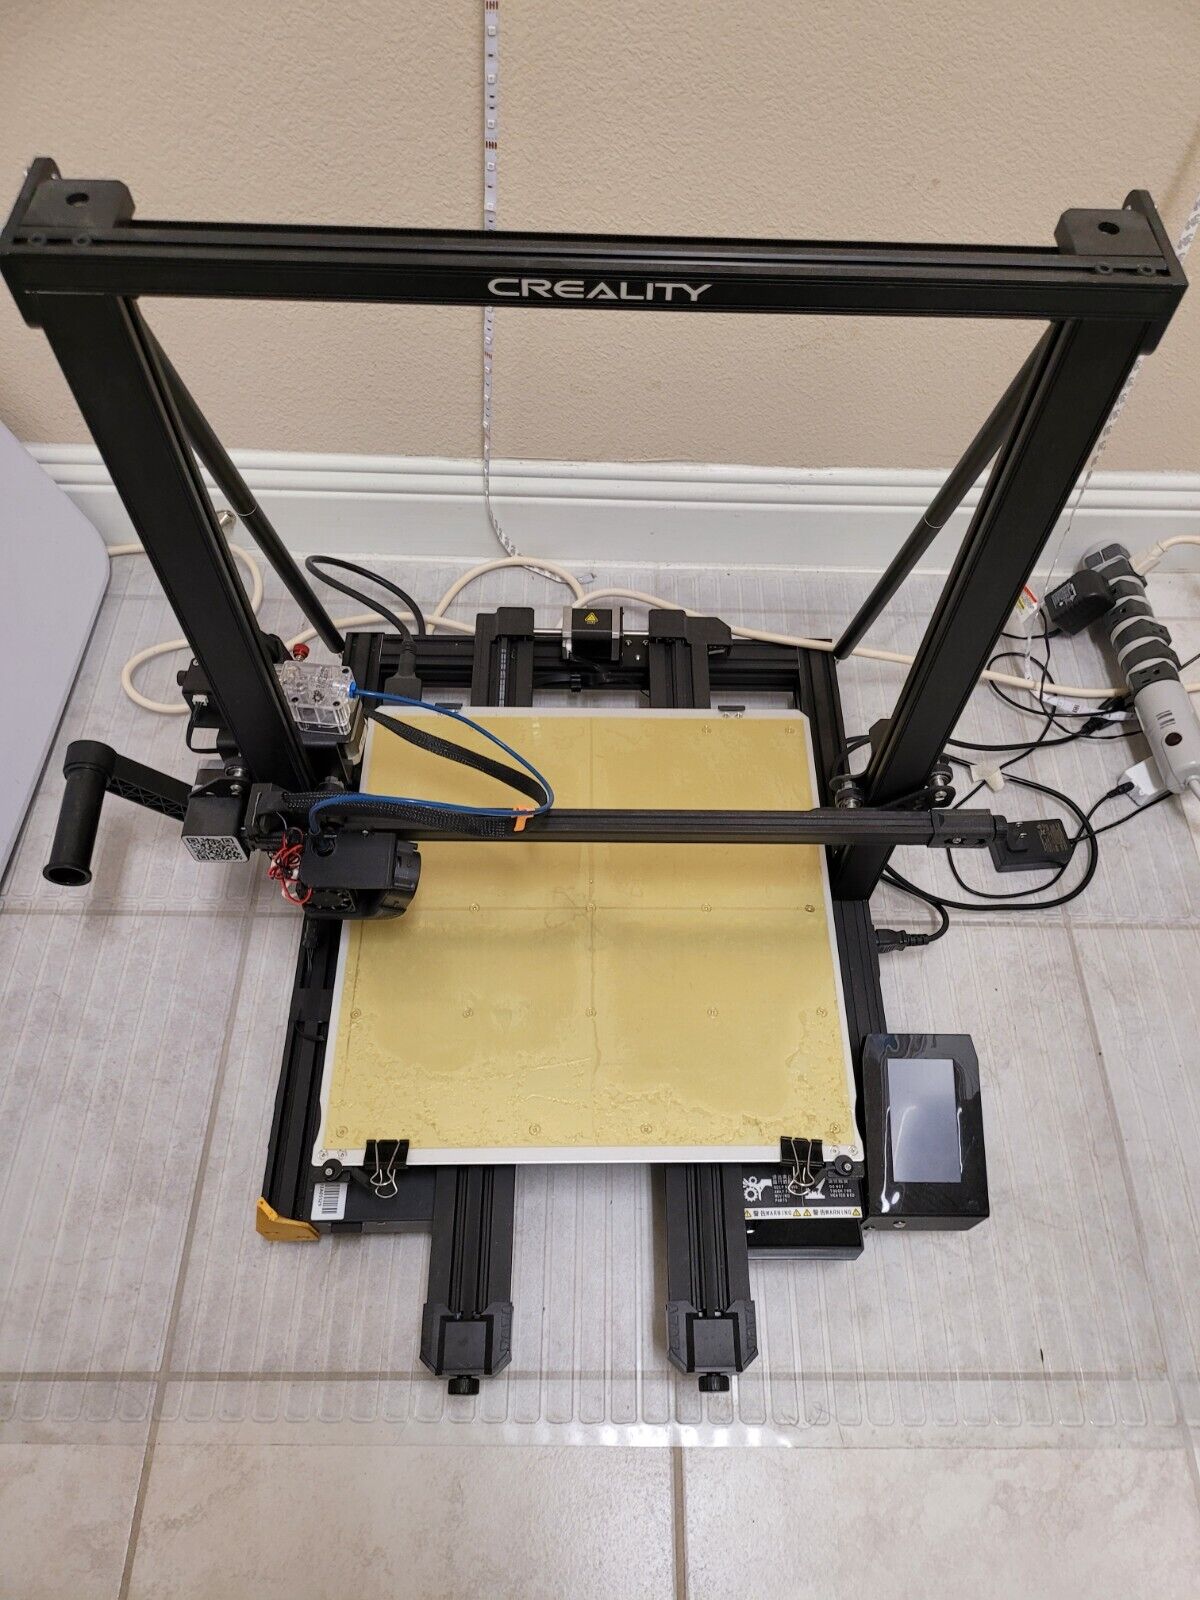 Creality CR-6 Max 3D Printer Upgraded with dual extruder and PEI Flex plate